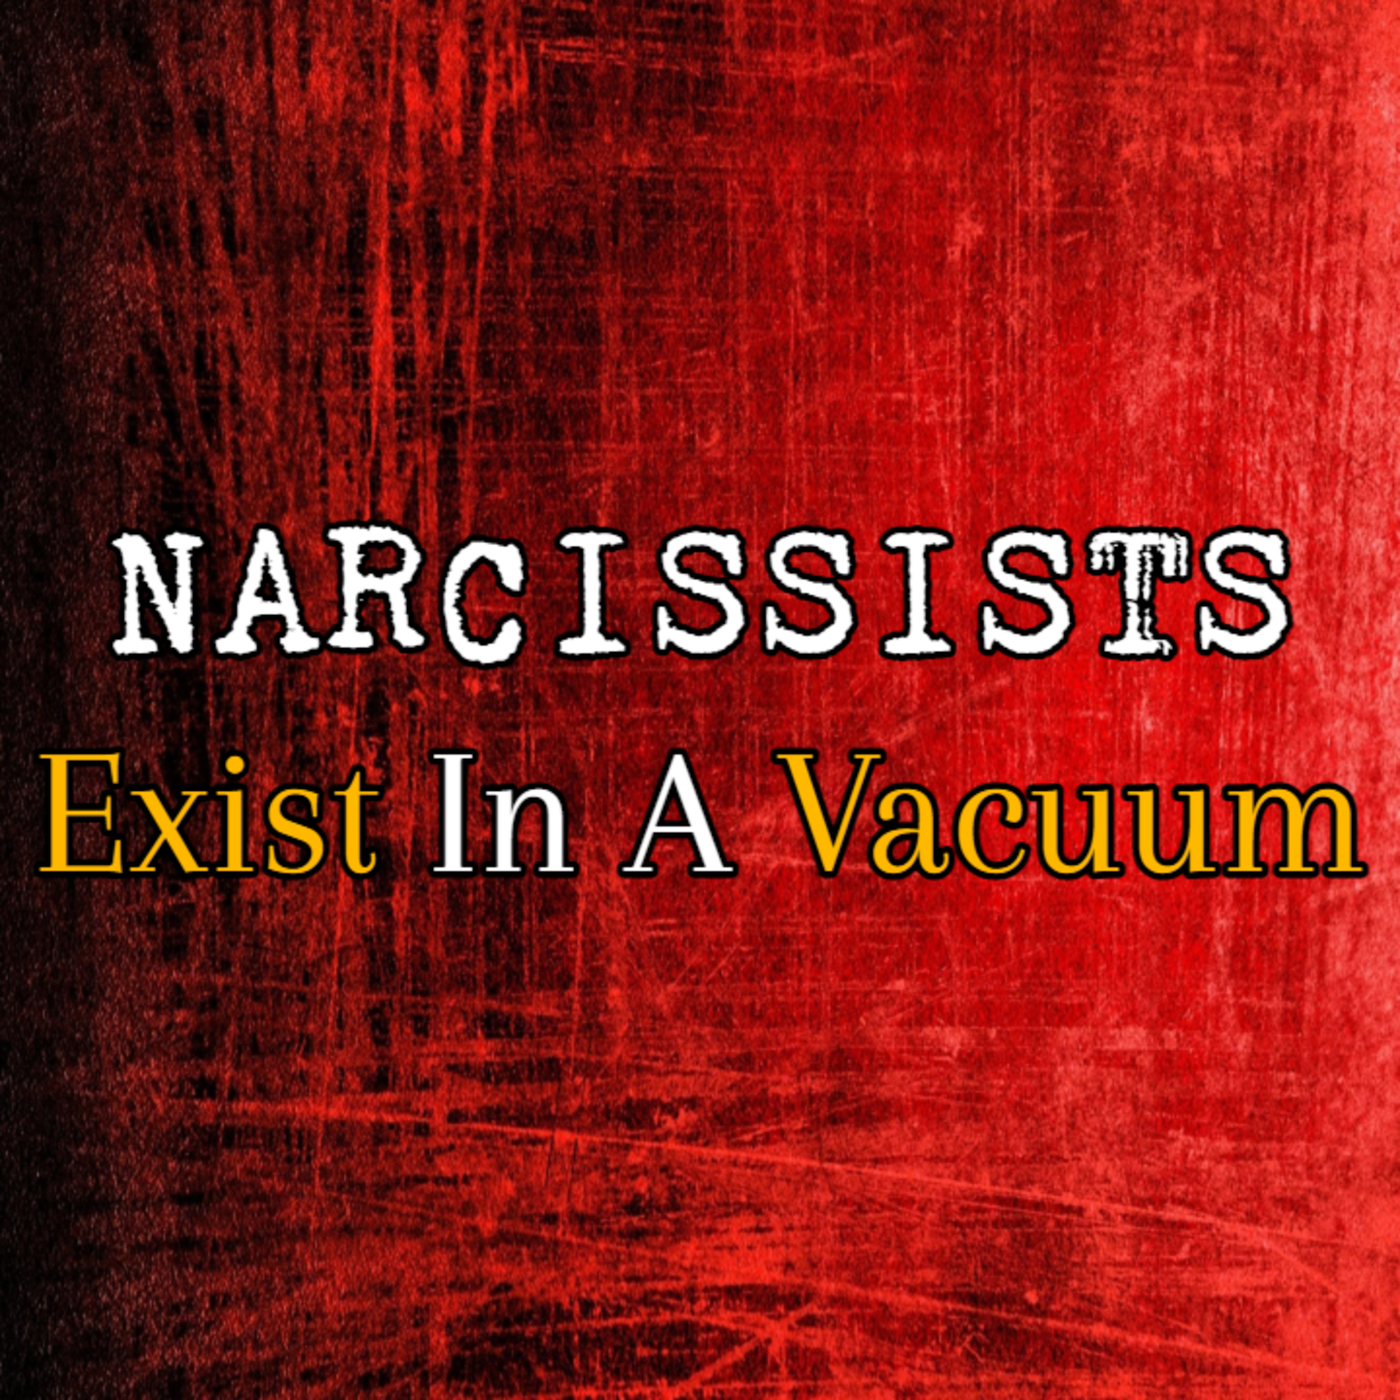 Episode 223: Narcissists Exist In A Vacuum